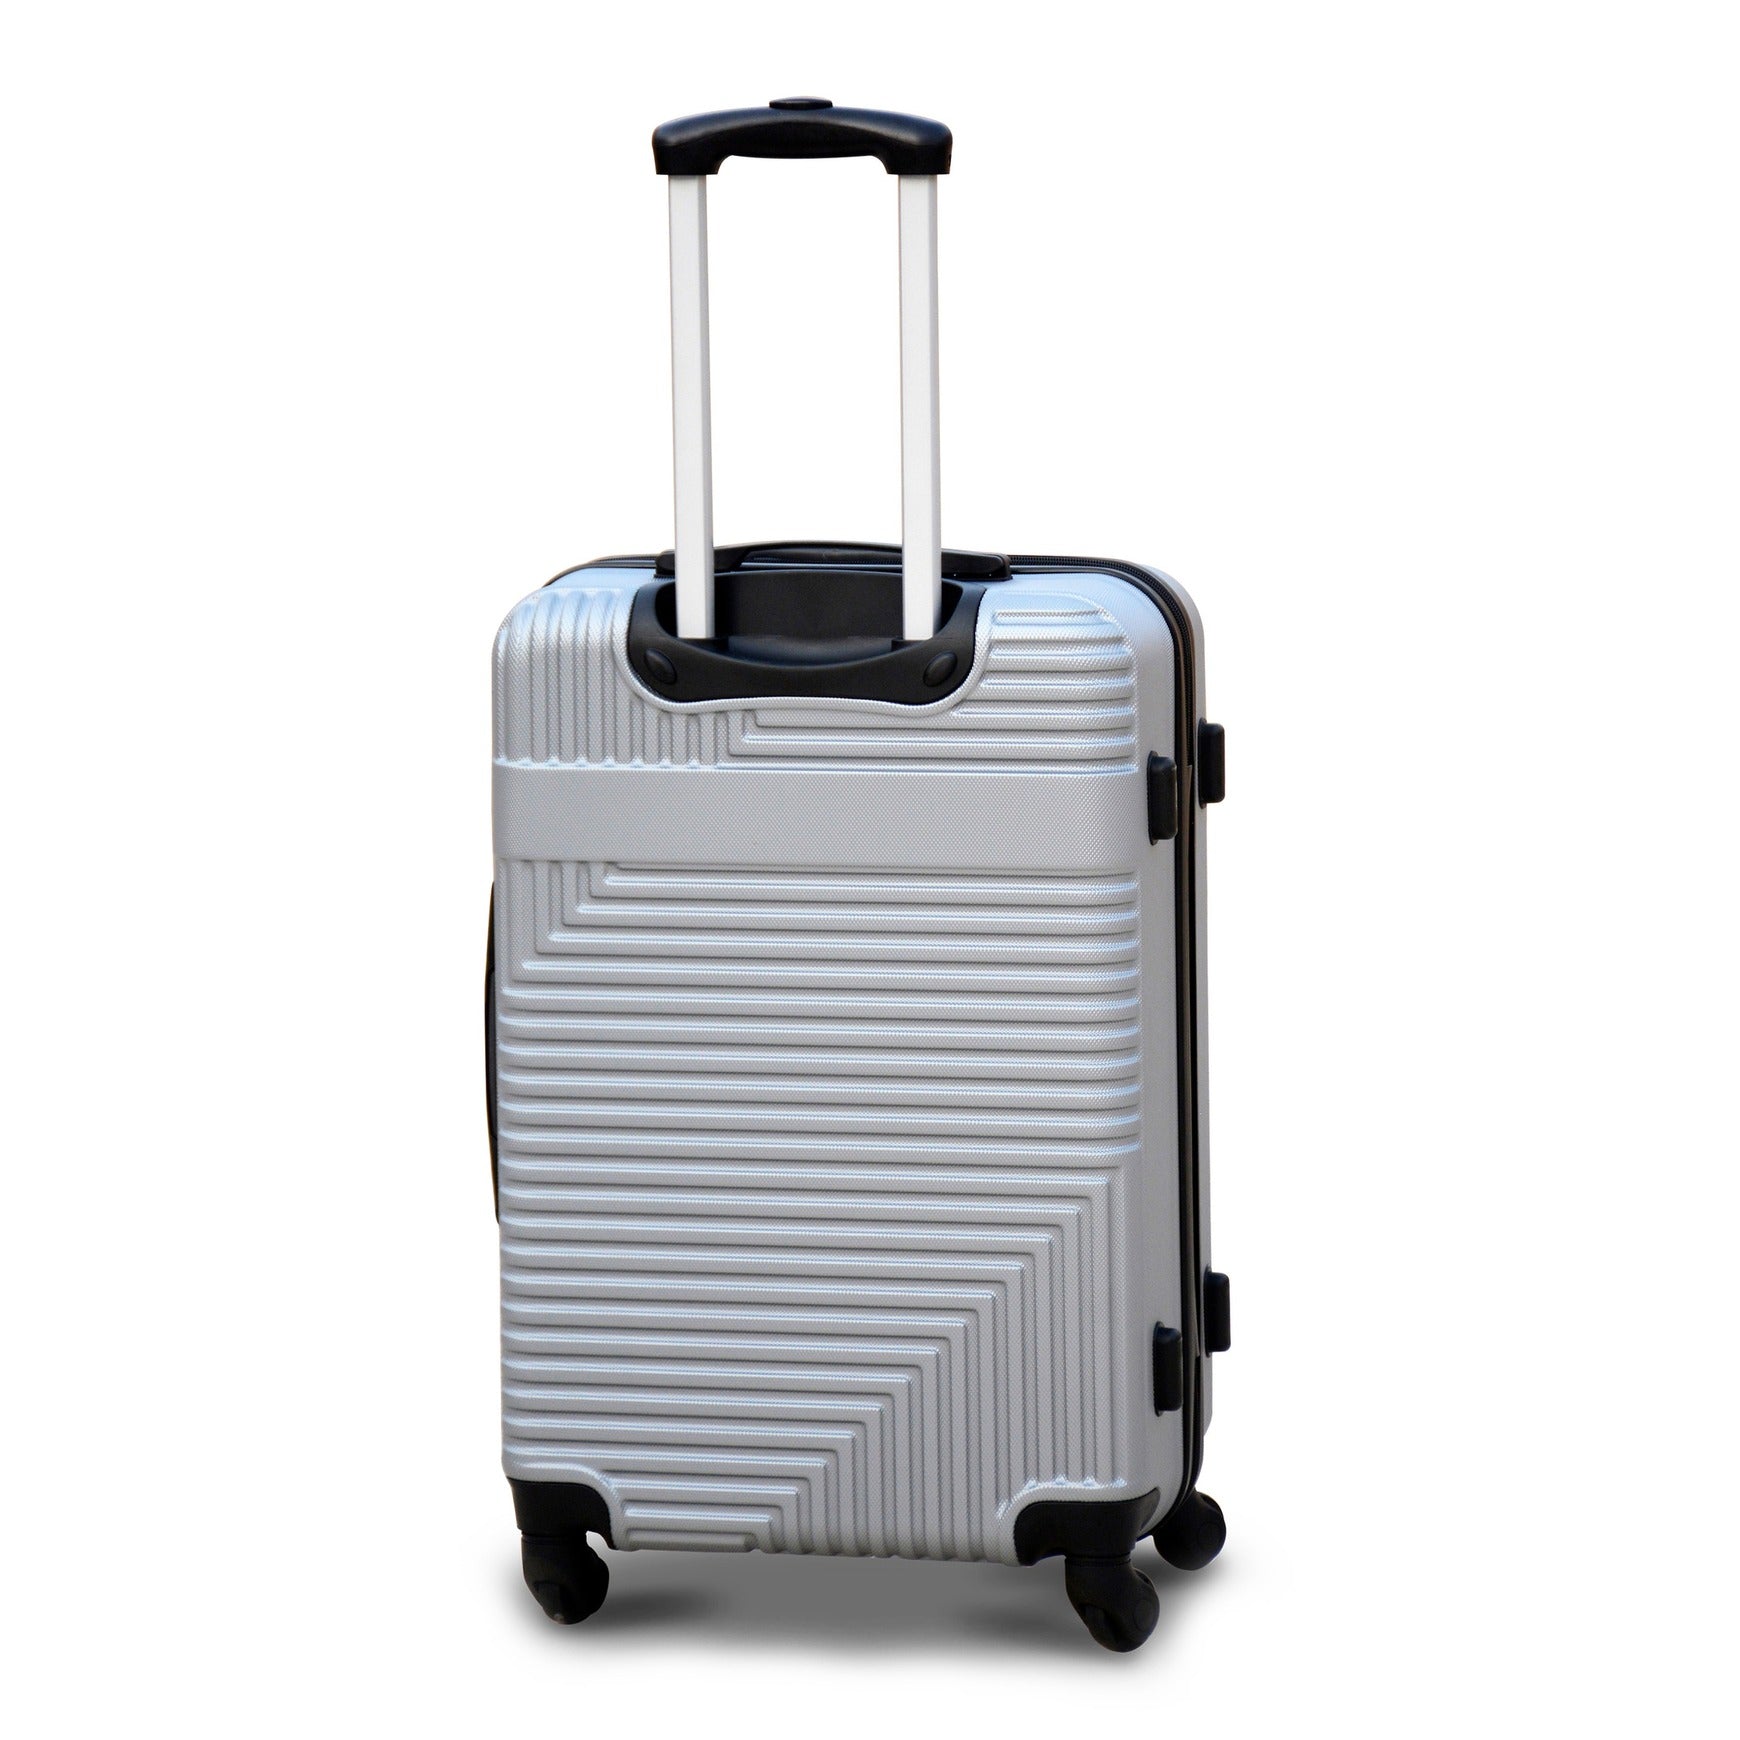 28" Silver Colour Travel Way ABS Luggage Lightweight Hard Case Trolley Bag